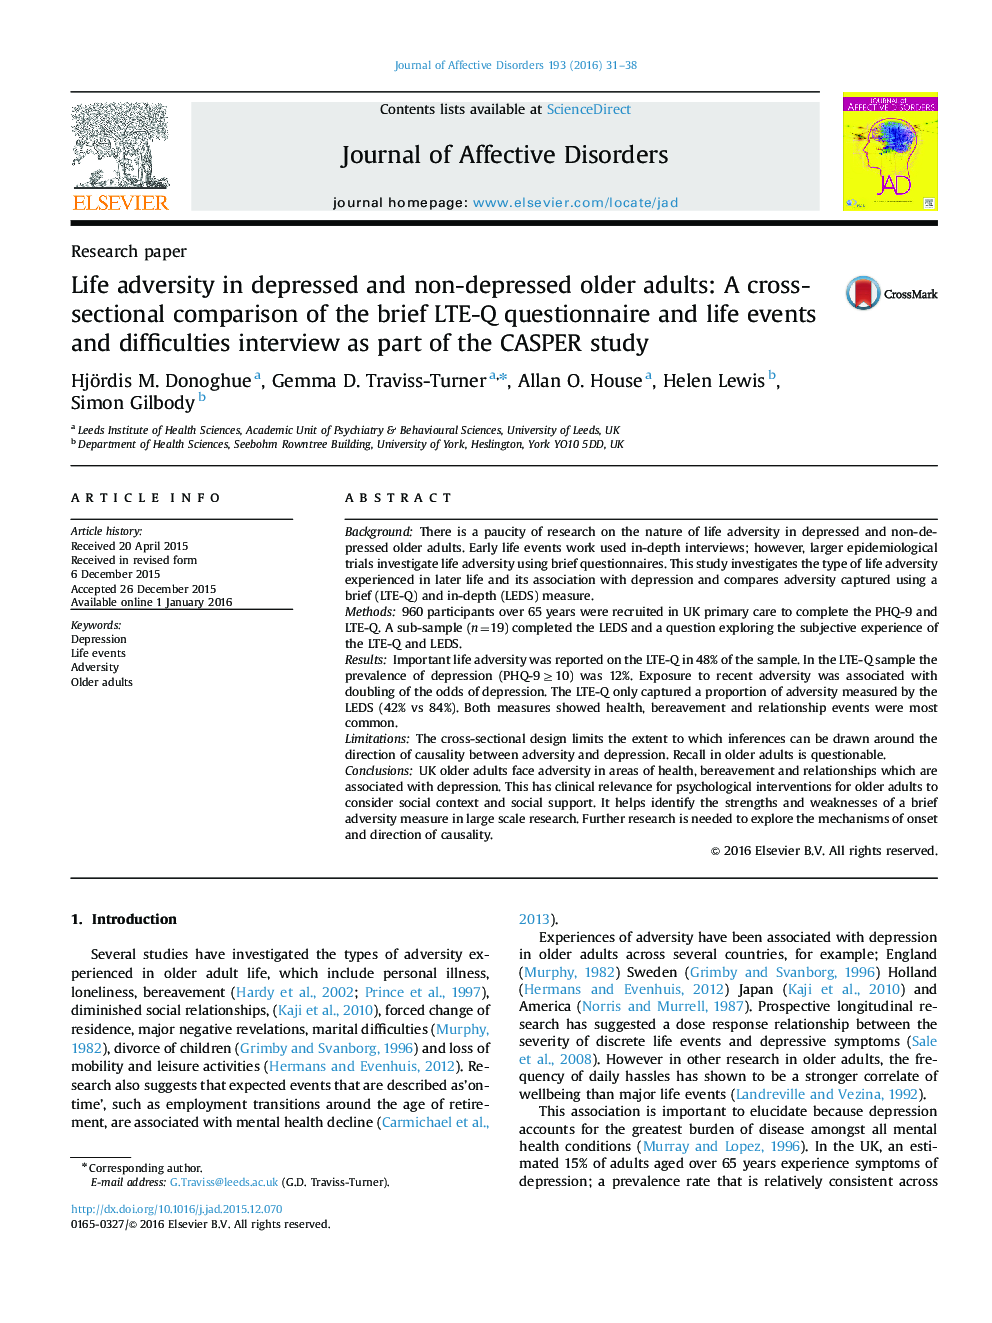 Life adversity in depressed and non-depressed older adults: A cross-sectional comparison of the brief LTE-Q questionnaire and life events and difficulties interview as part of the CASPER study